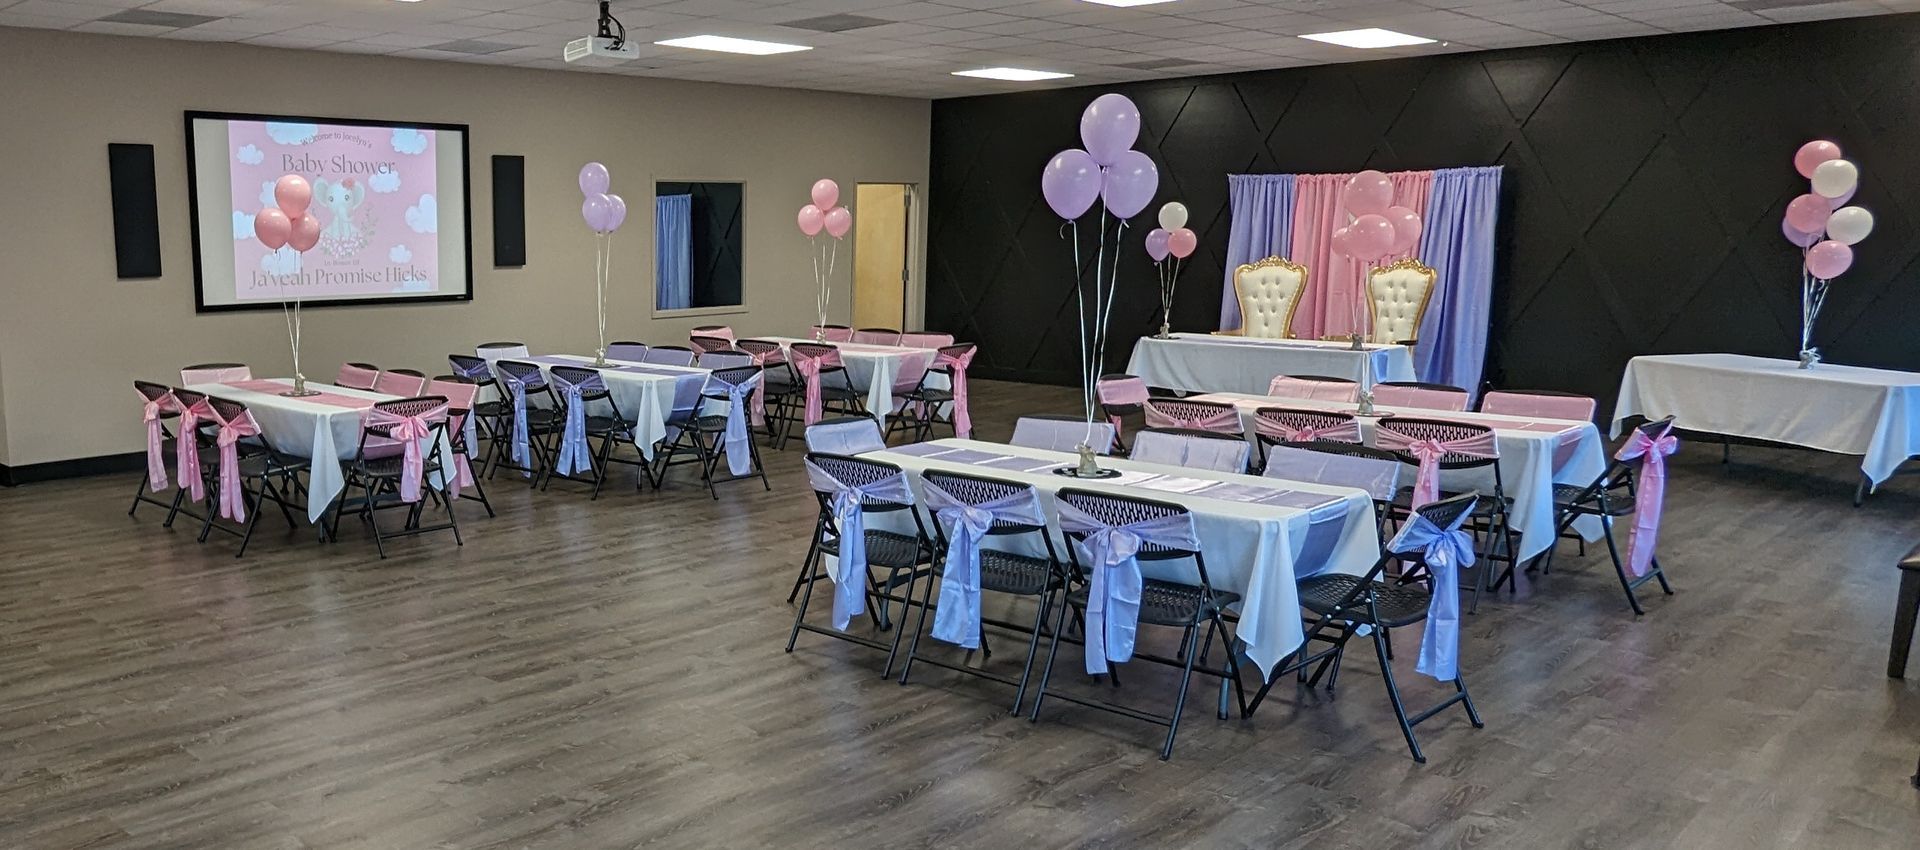 Venue showing tables and chair after decorations. Decorations are purple and pink with balloon centerpieces at each table.